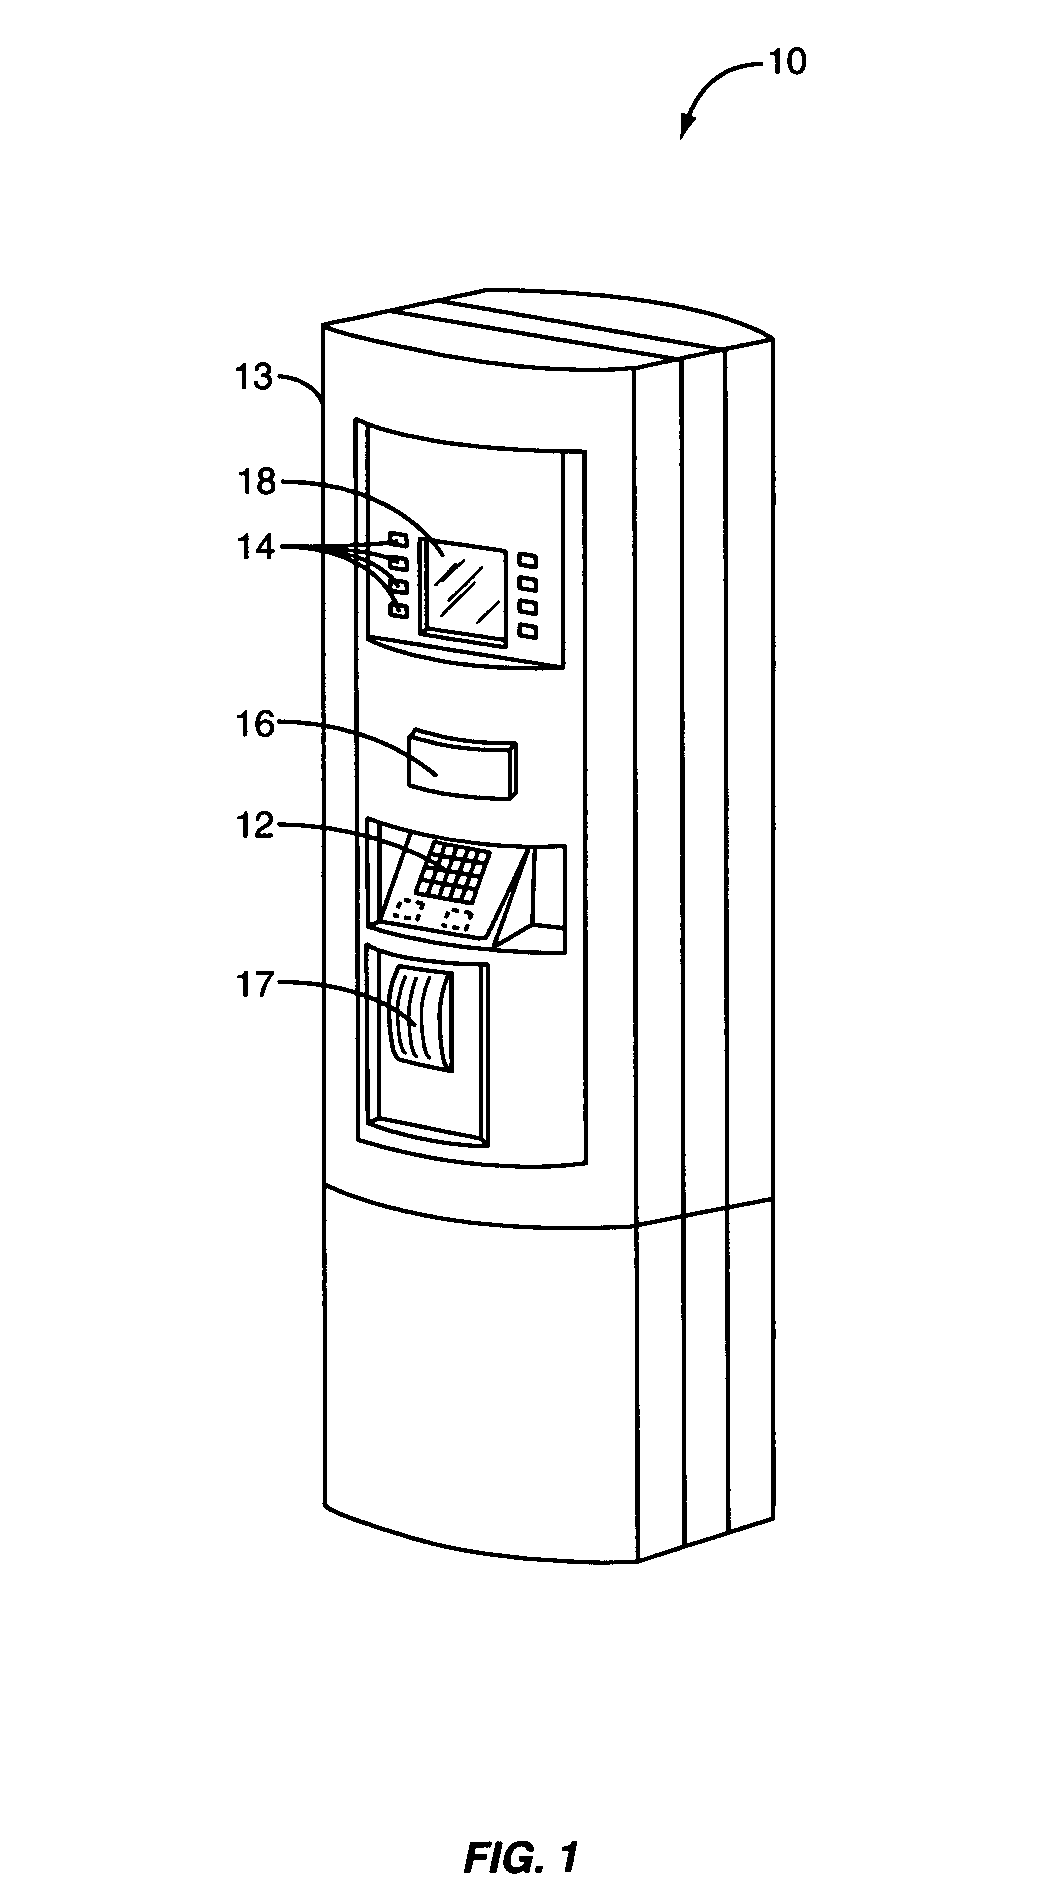 Remote payment account relational system and method for retail devices